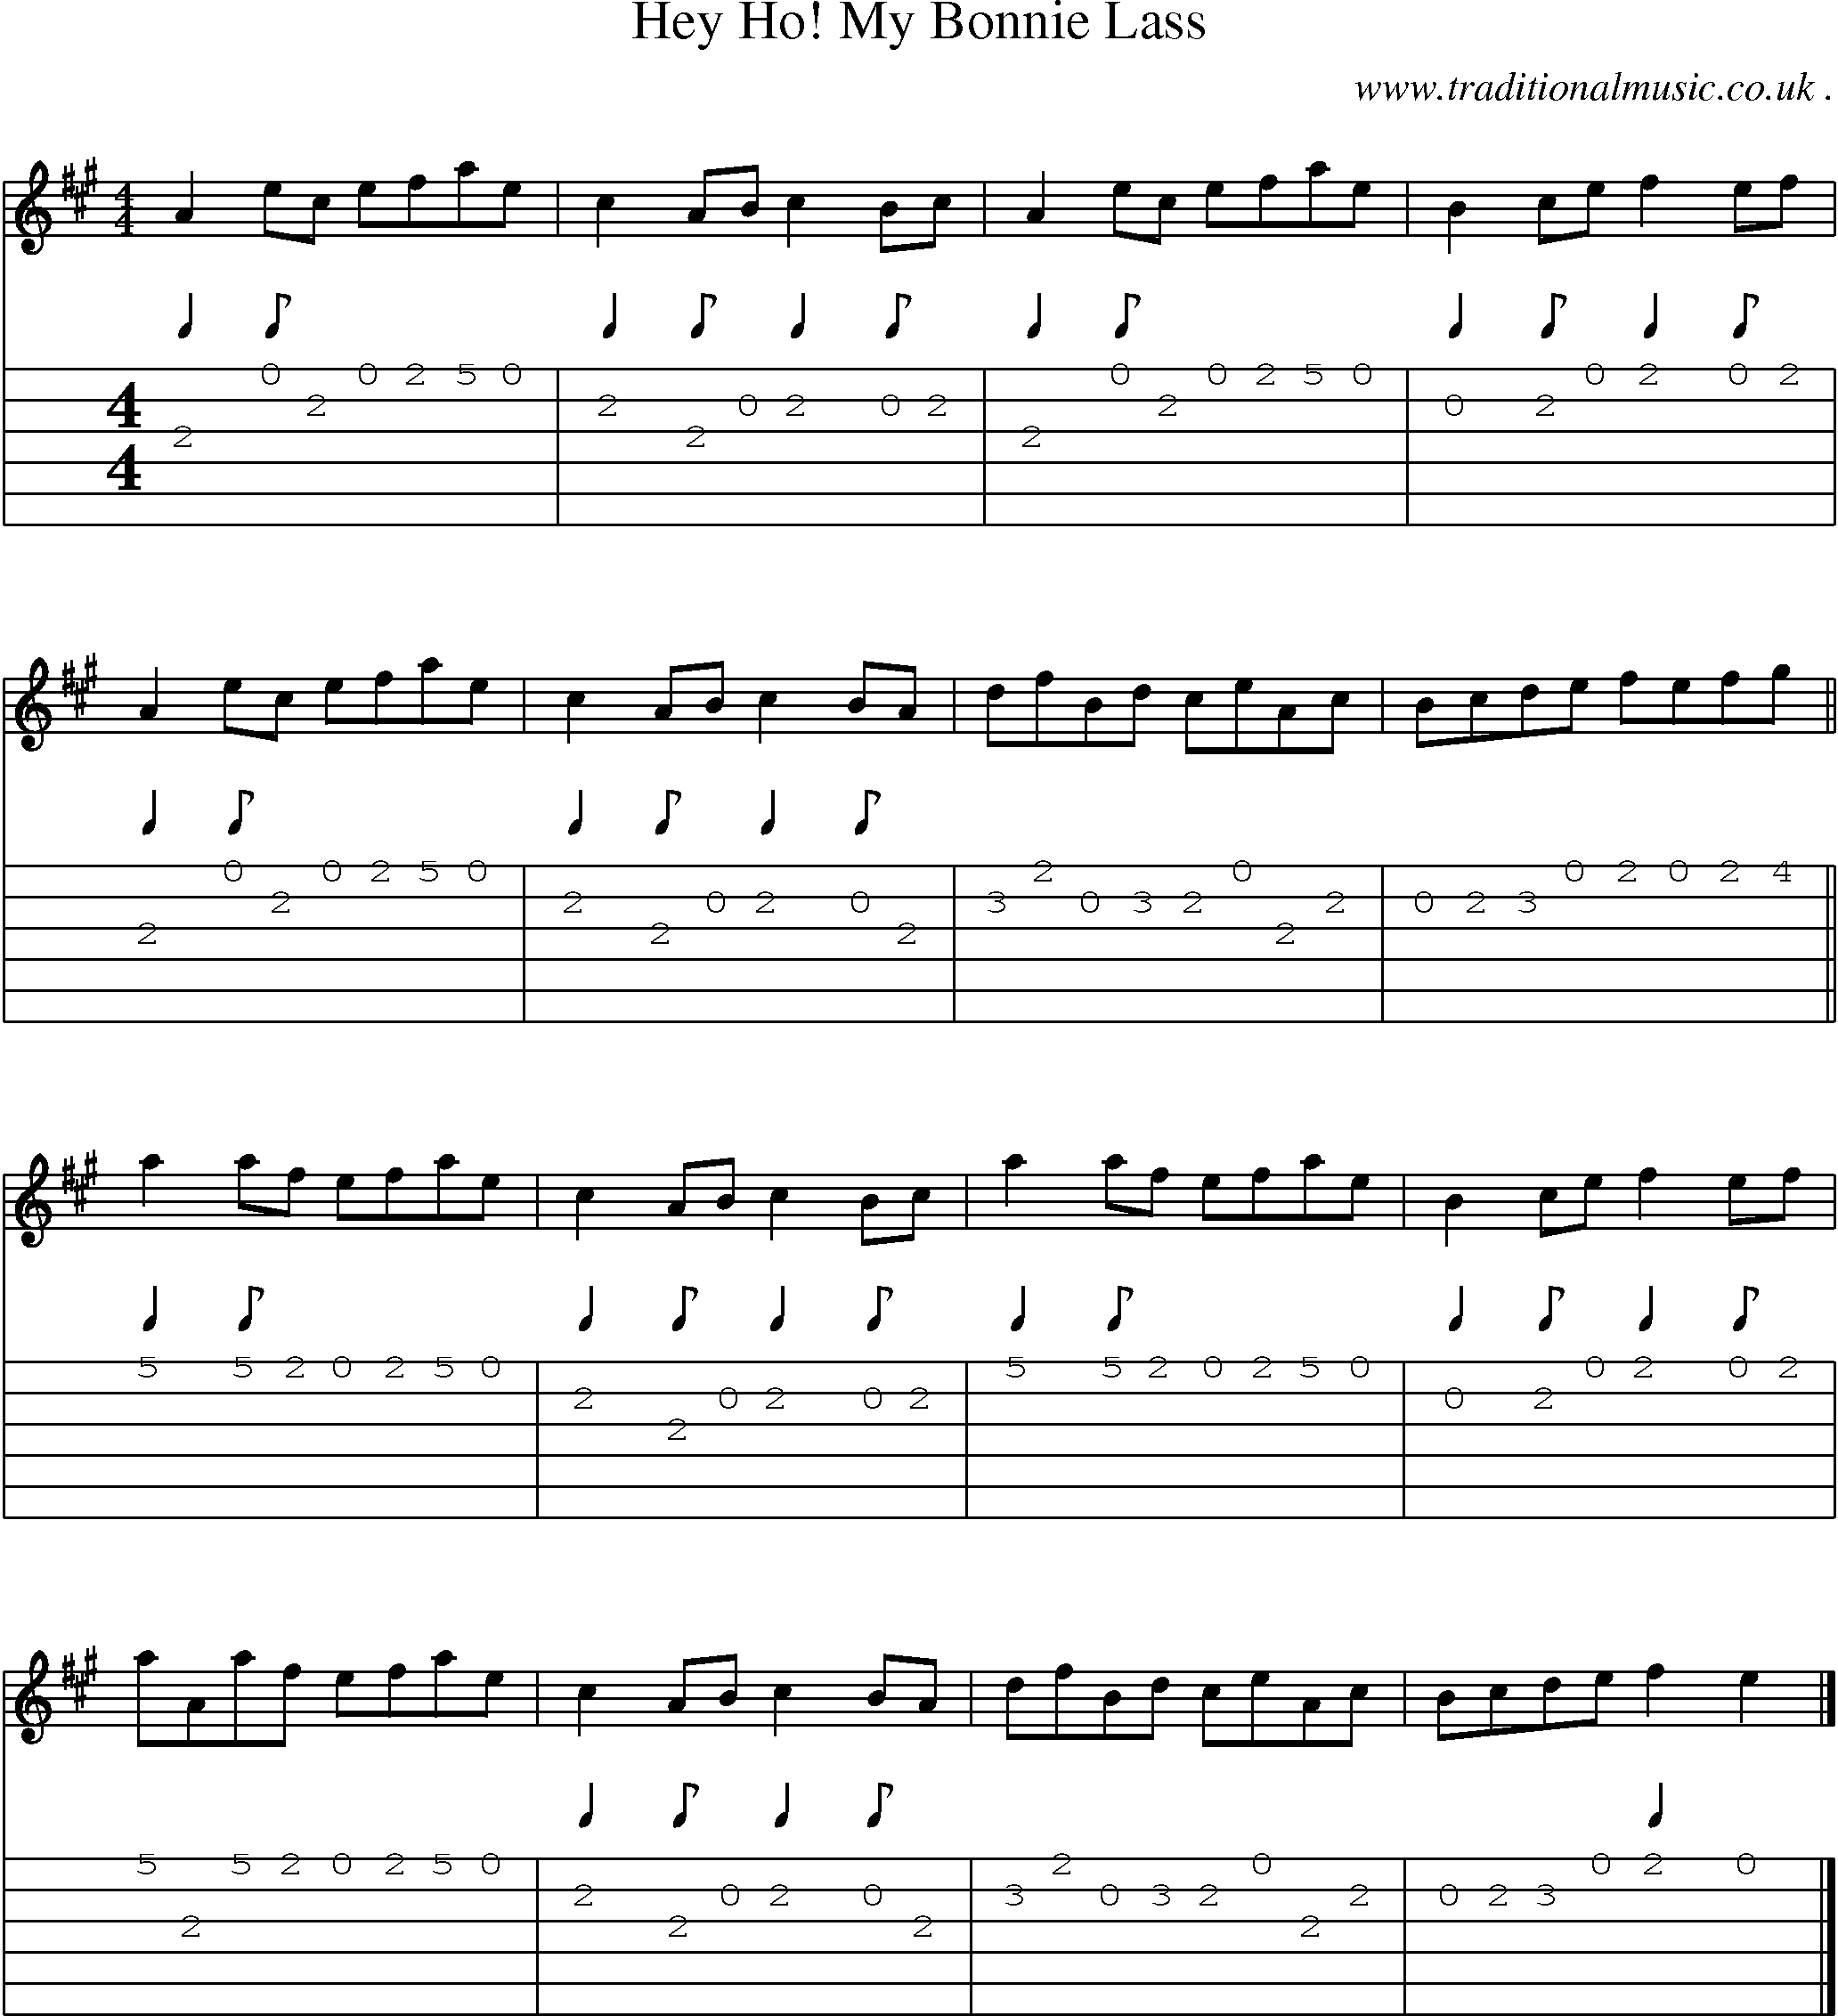 Sheet-music  score, Chords and Guitar Tabs for Hey Ho! My Bonnie Lass